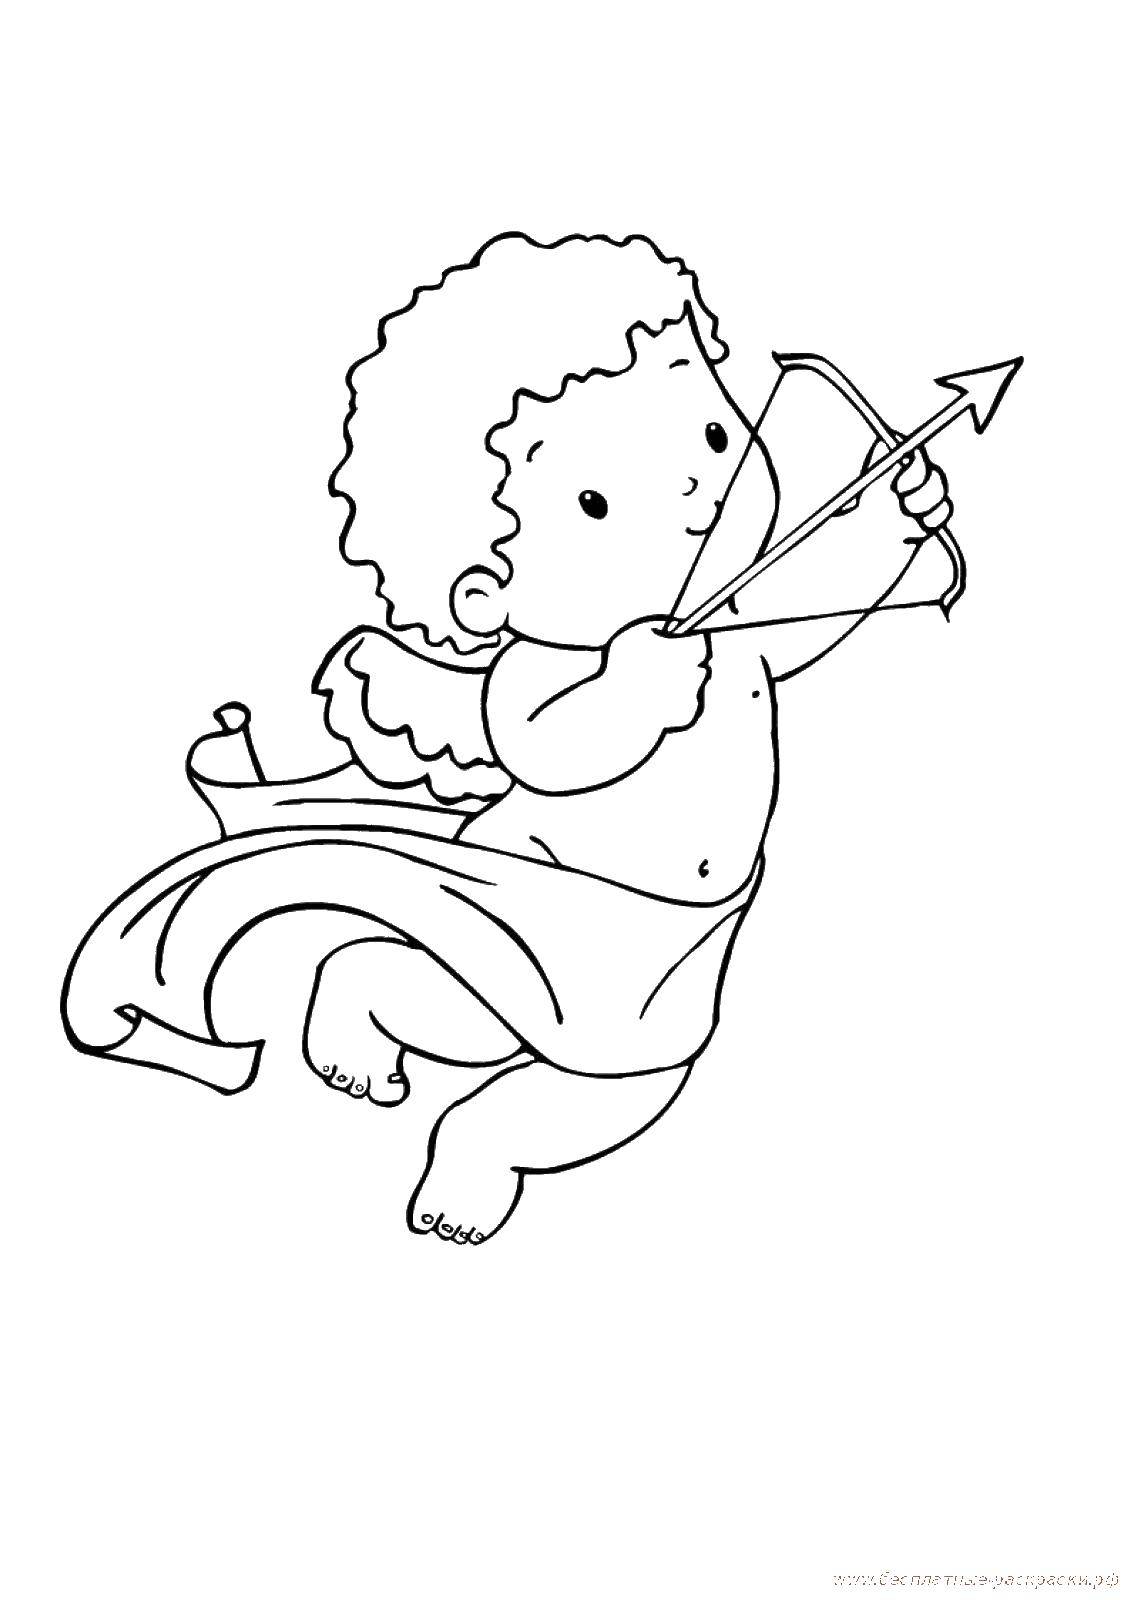 Coloring Baby Cupid. Category Cupid. Tags:  Valentines day, love, Cupid.